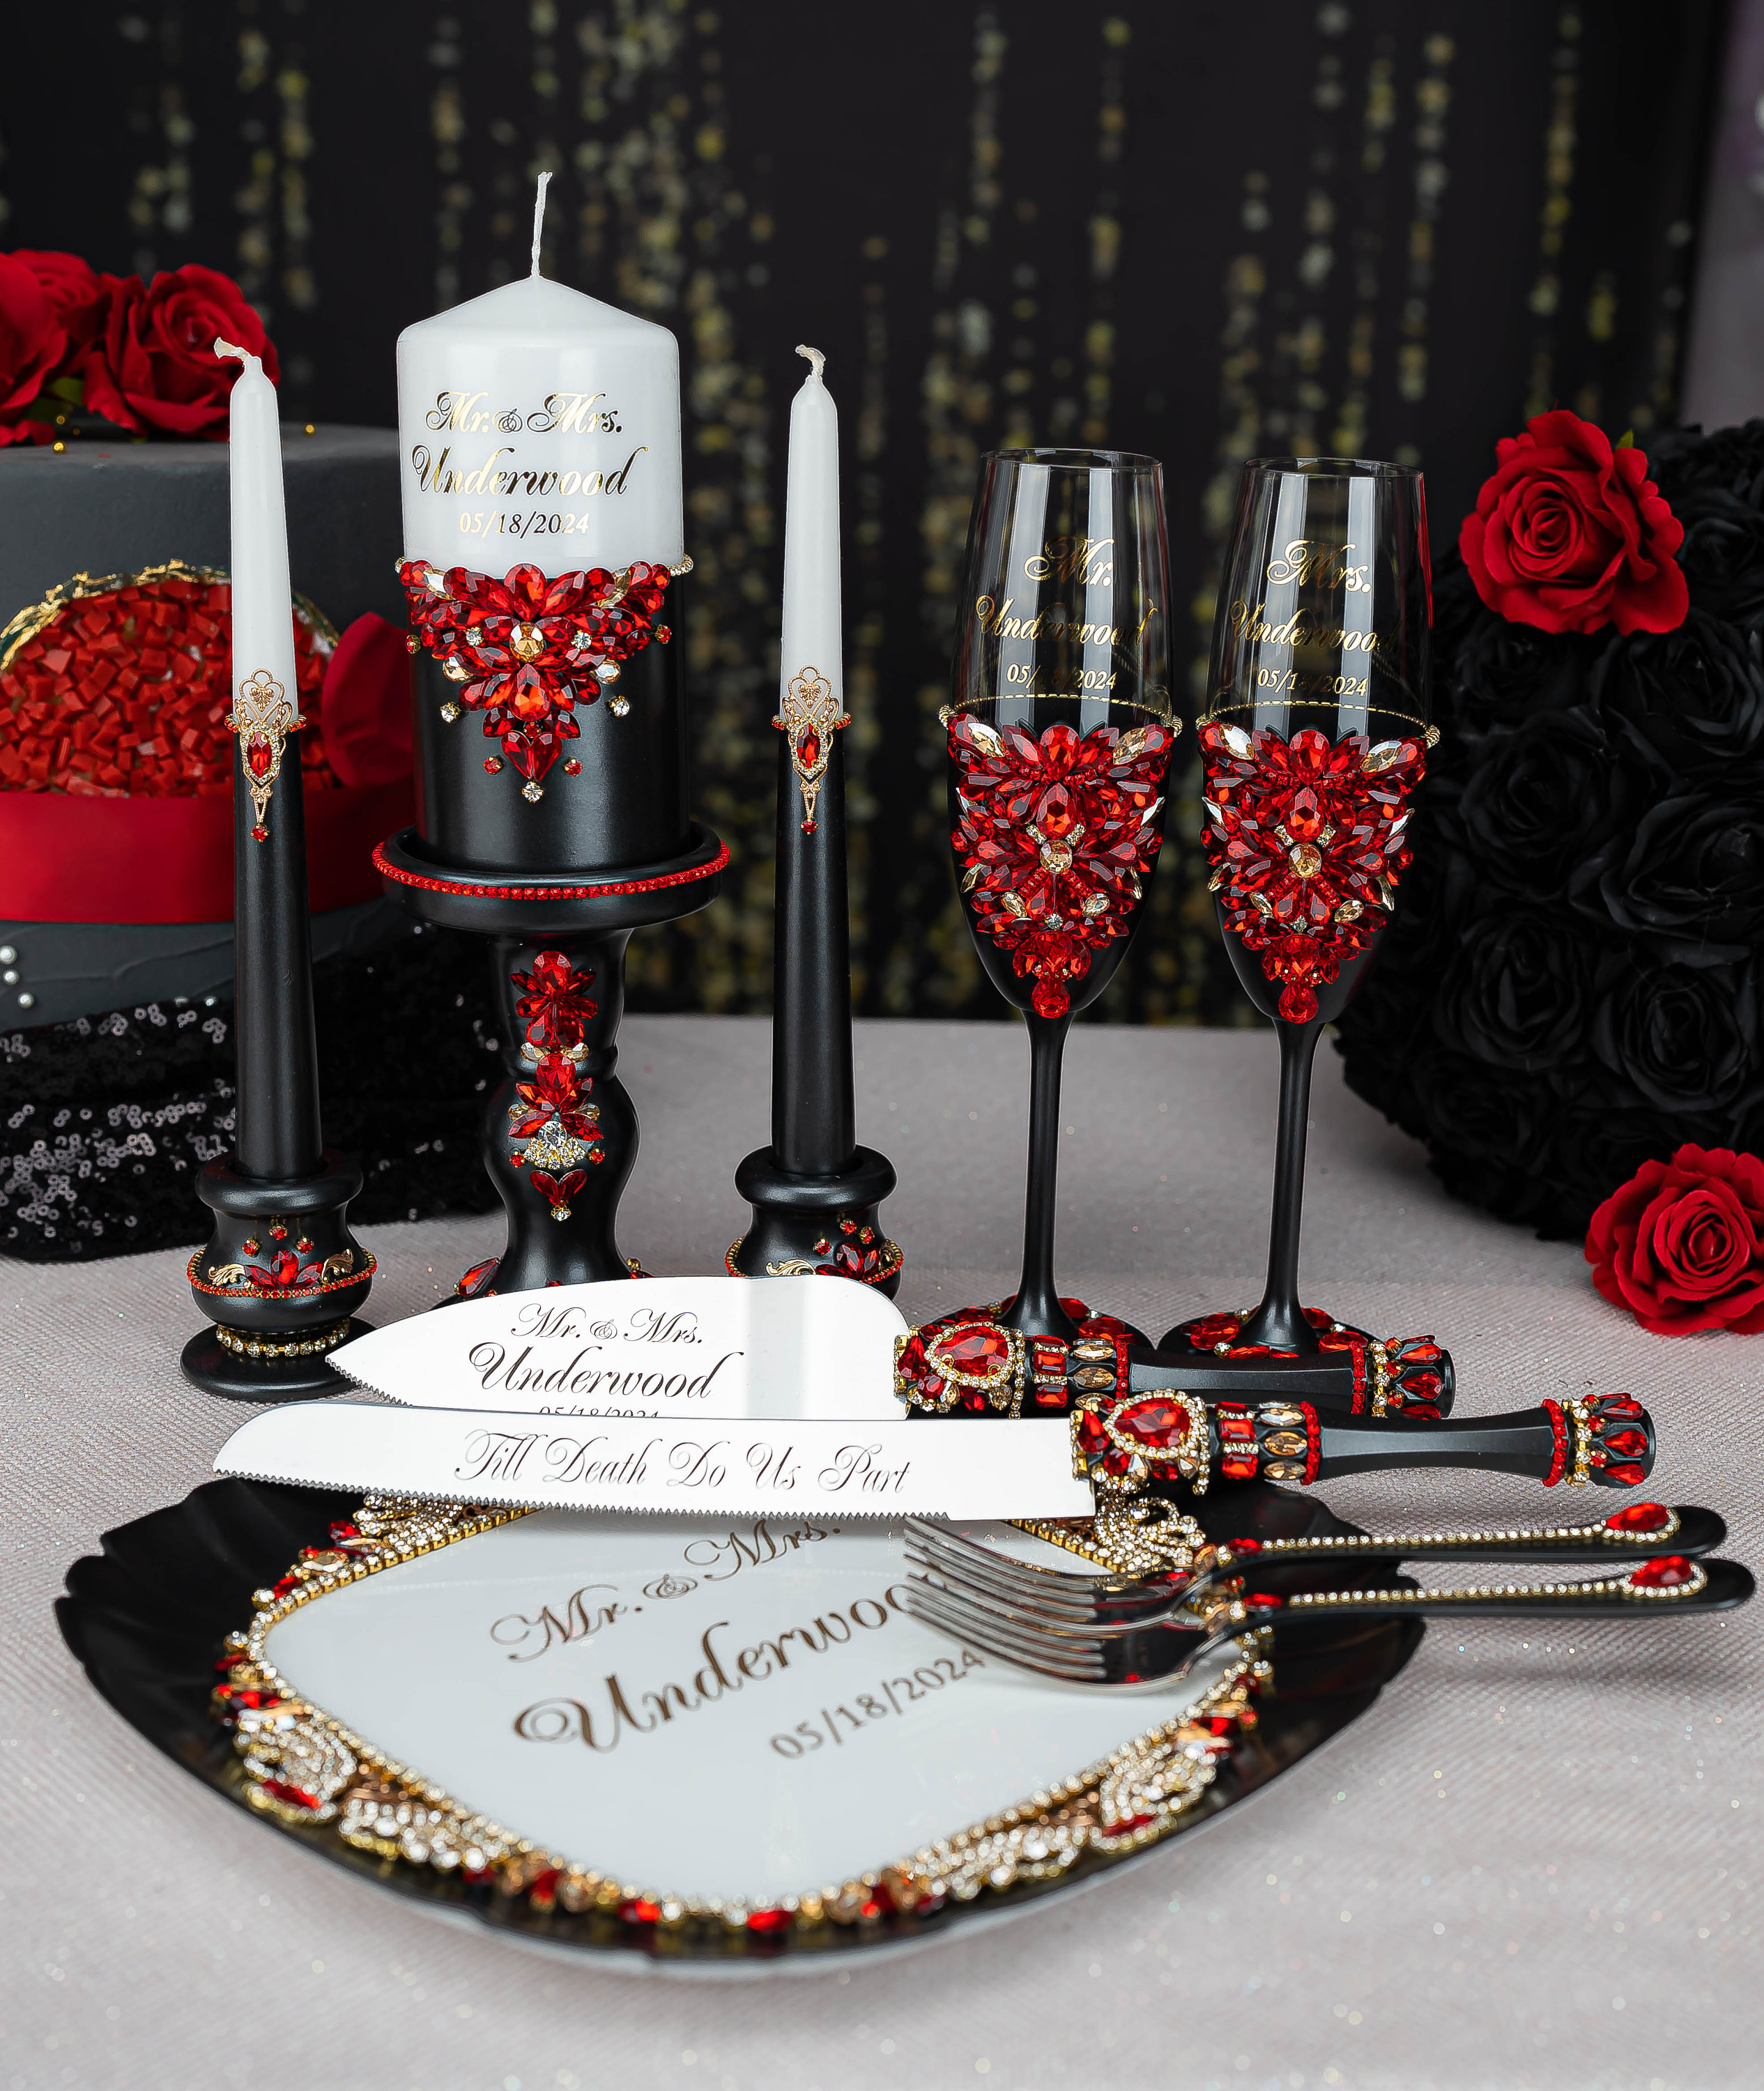 black ,red and some gold themed decor for wedding receptions,etc